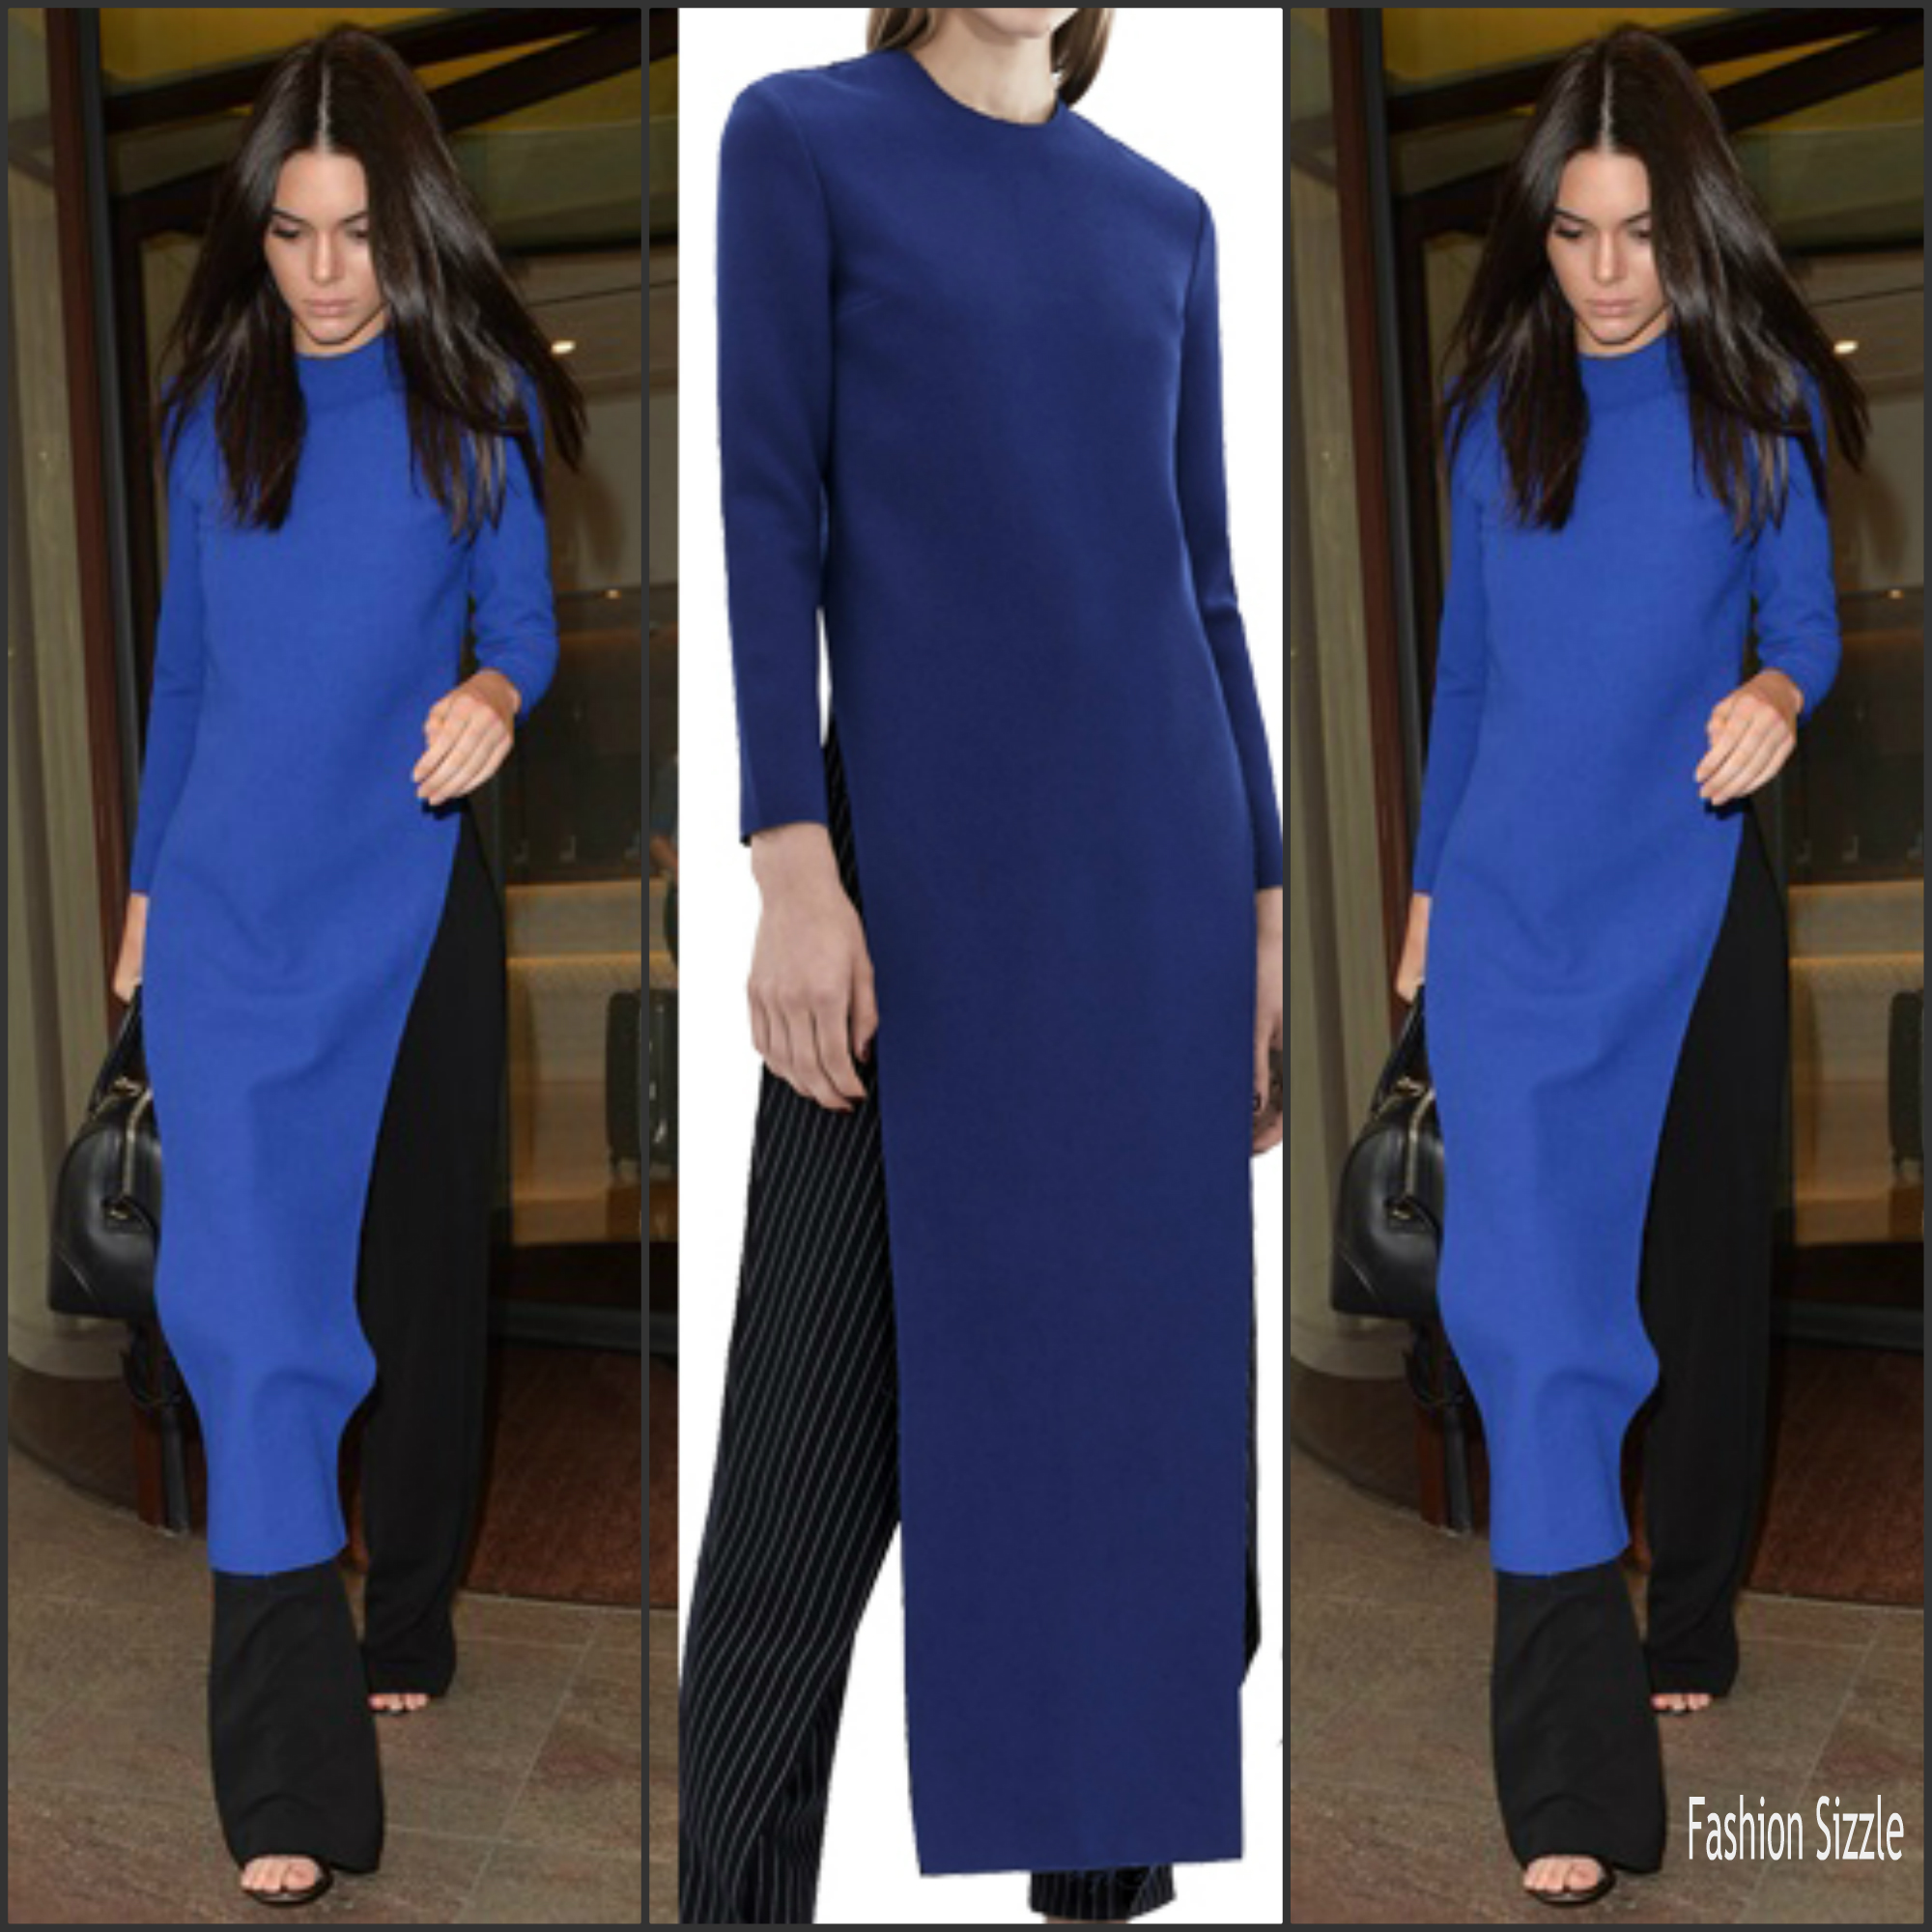 kendall-jenner-in-solace-london-at-cadogan-hall-in-london